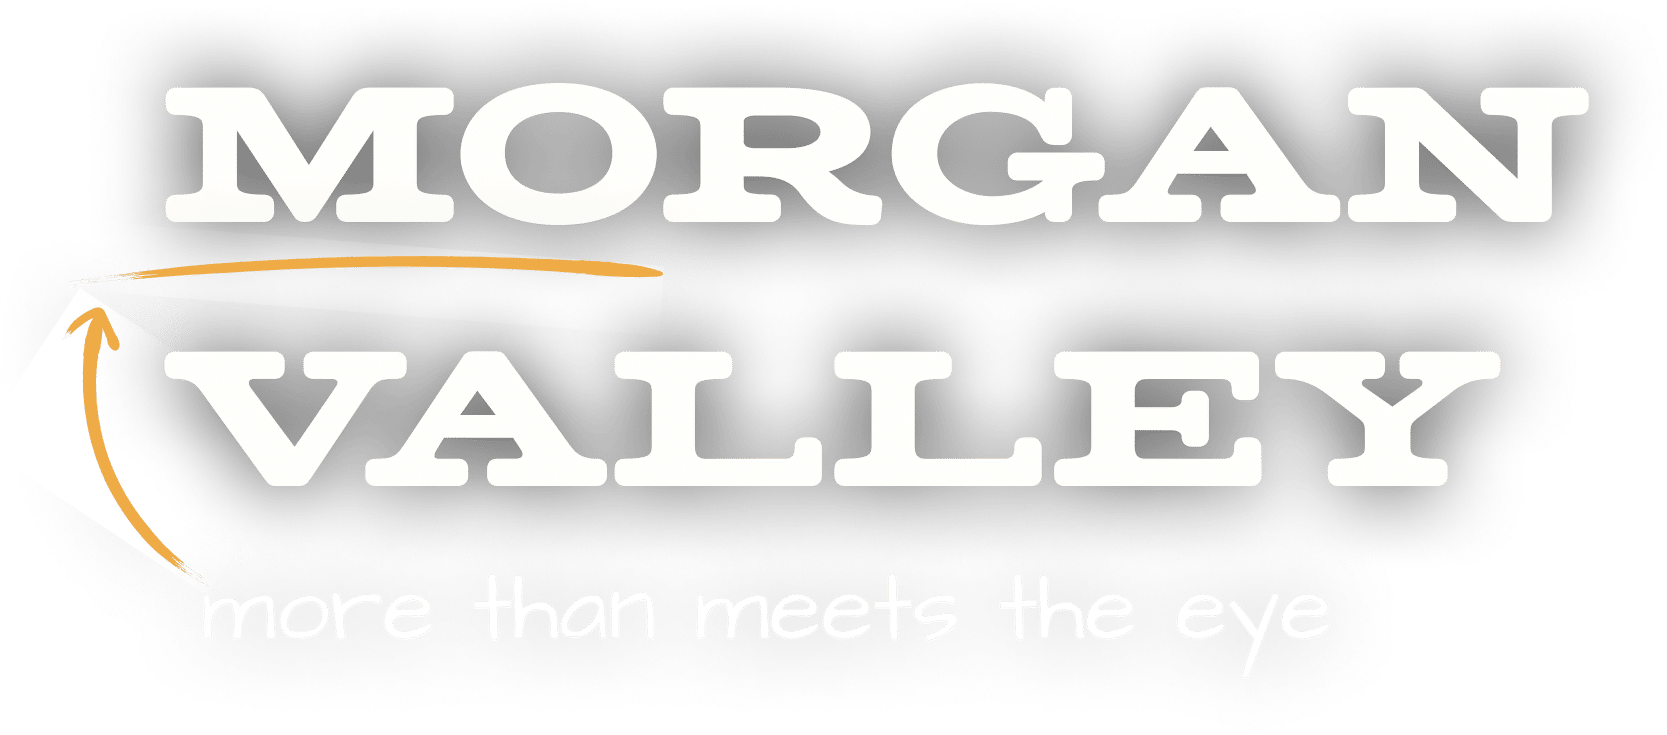 Welcome to Morgan Valley. More than meets the eye logo.